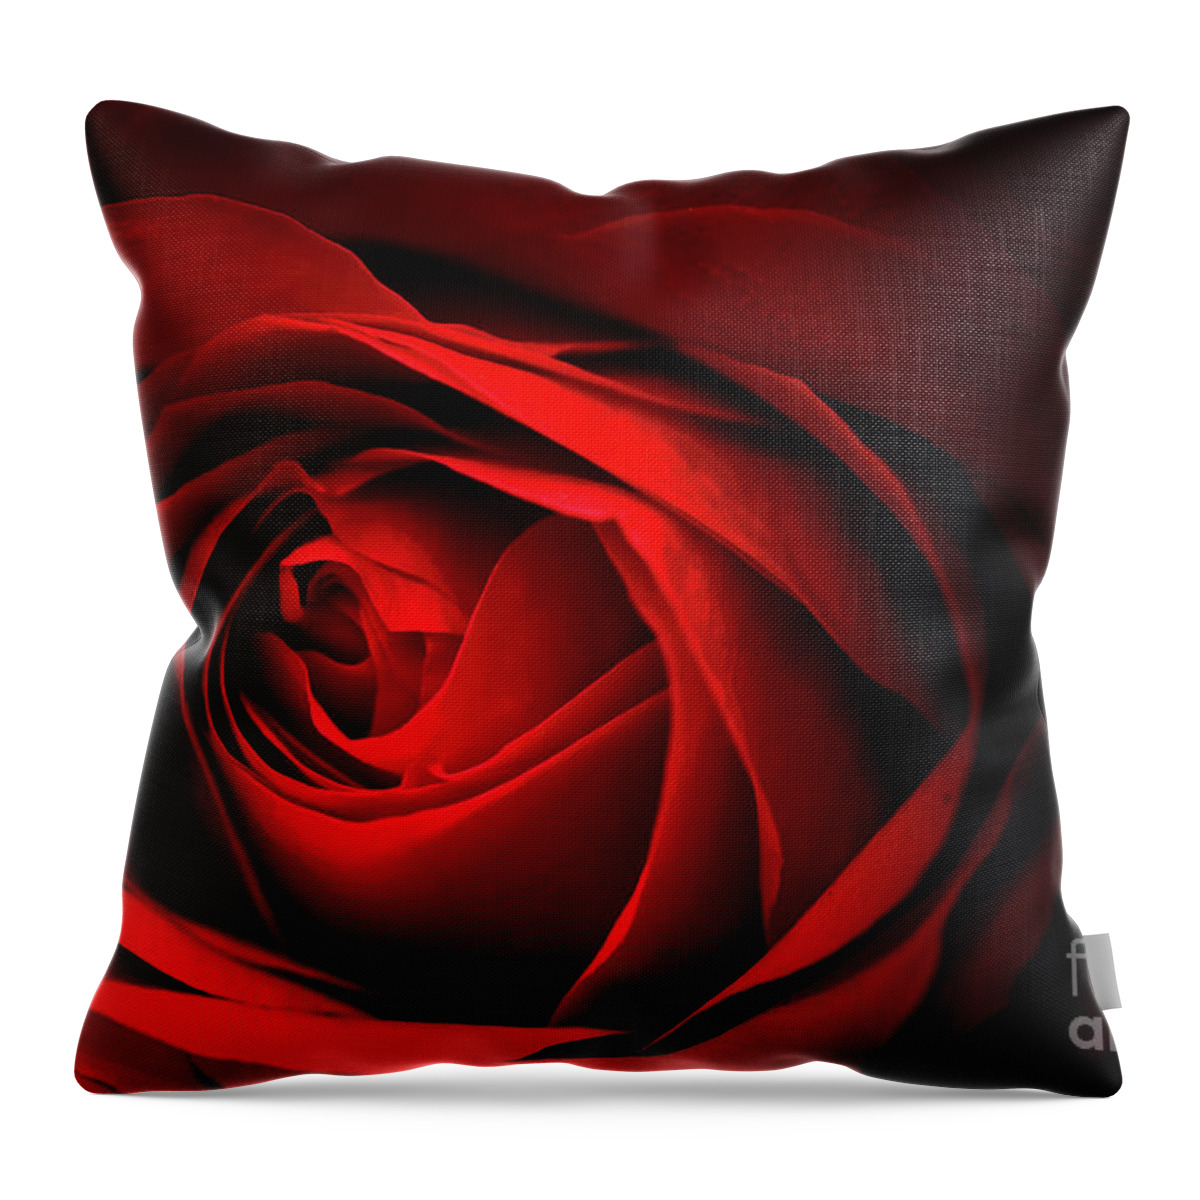 Red Throw Pillow featuring the photograph Red Rose Close by Charline Xia